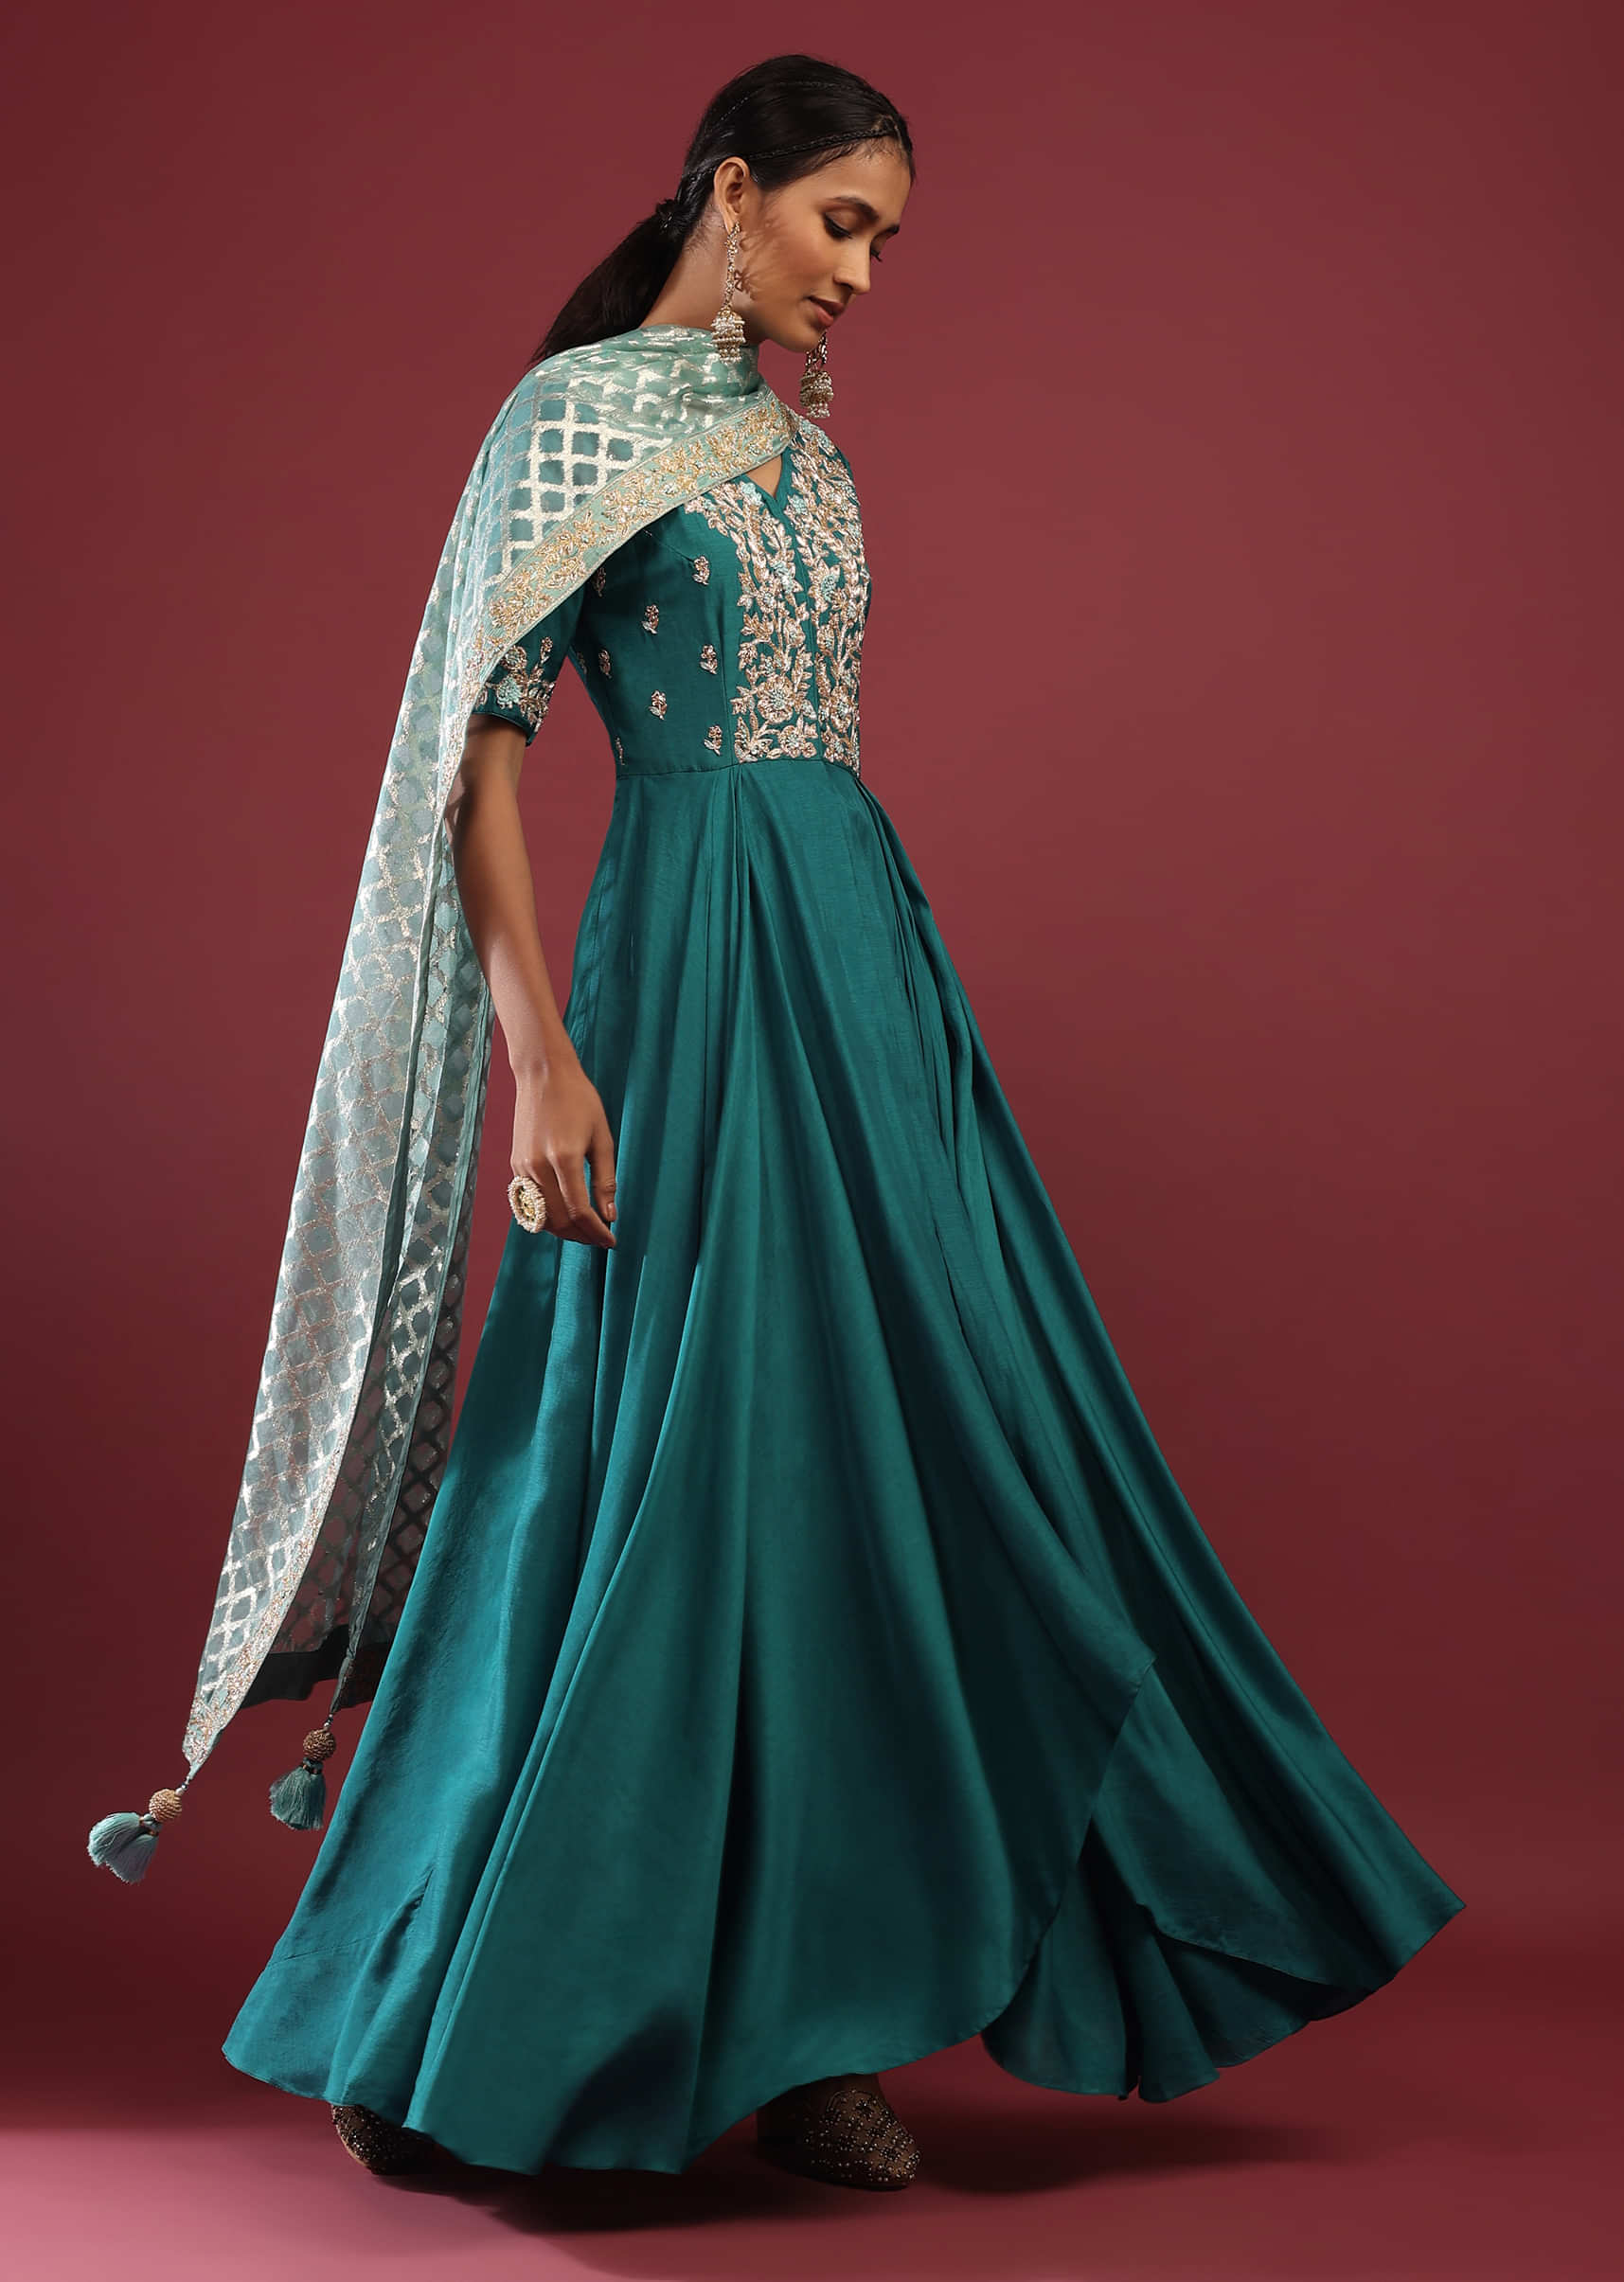 Teal Blue High Low Anarkali Suit With A Front Slit, Zardosi Floral Embroidery And Mint Lurex Dupatta